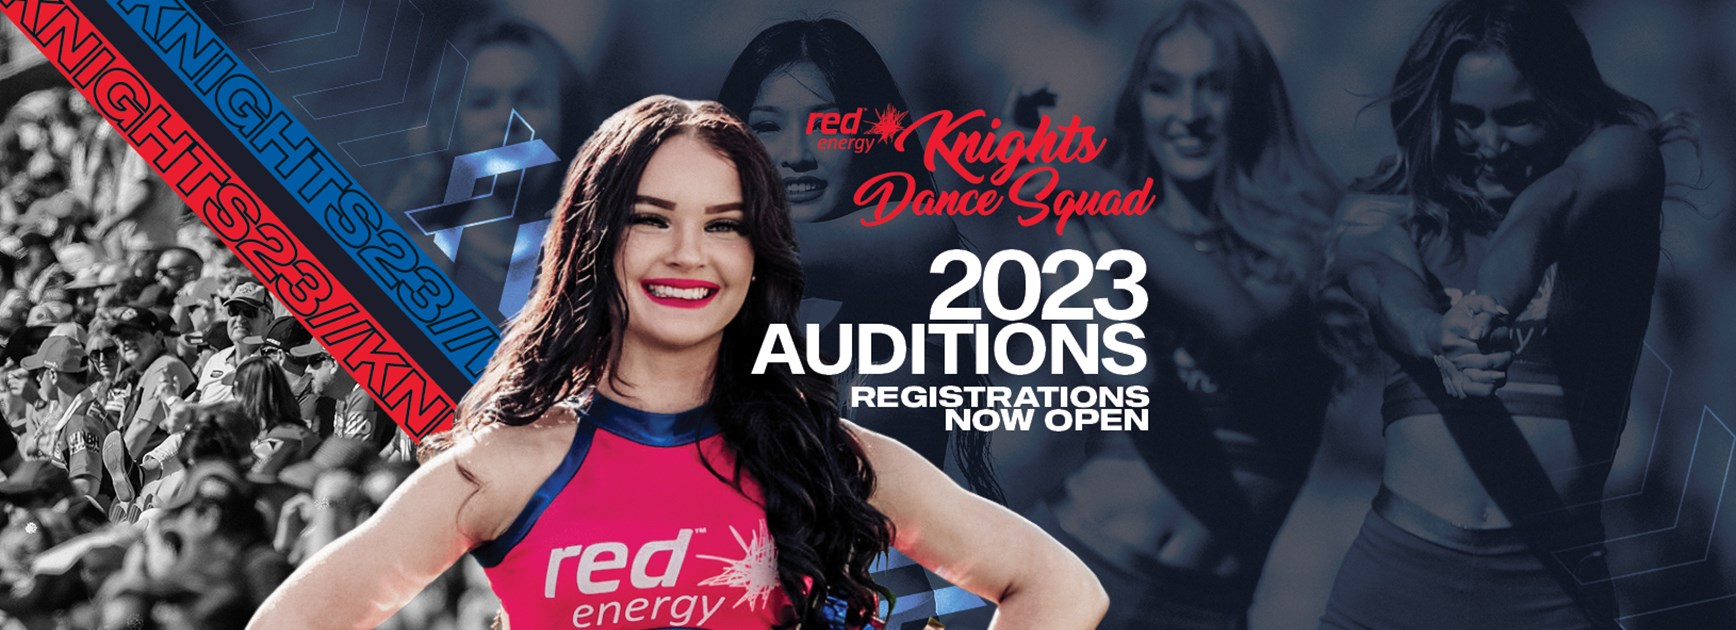 Registrations open for 2023 Dance Squad auditions